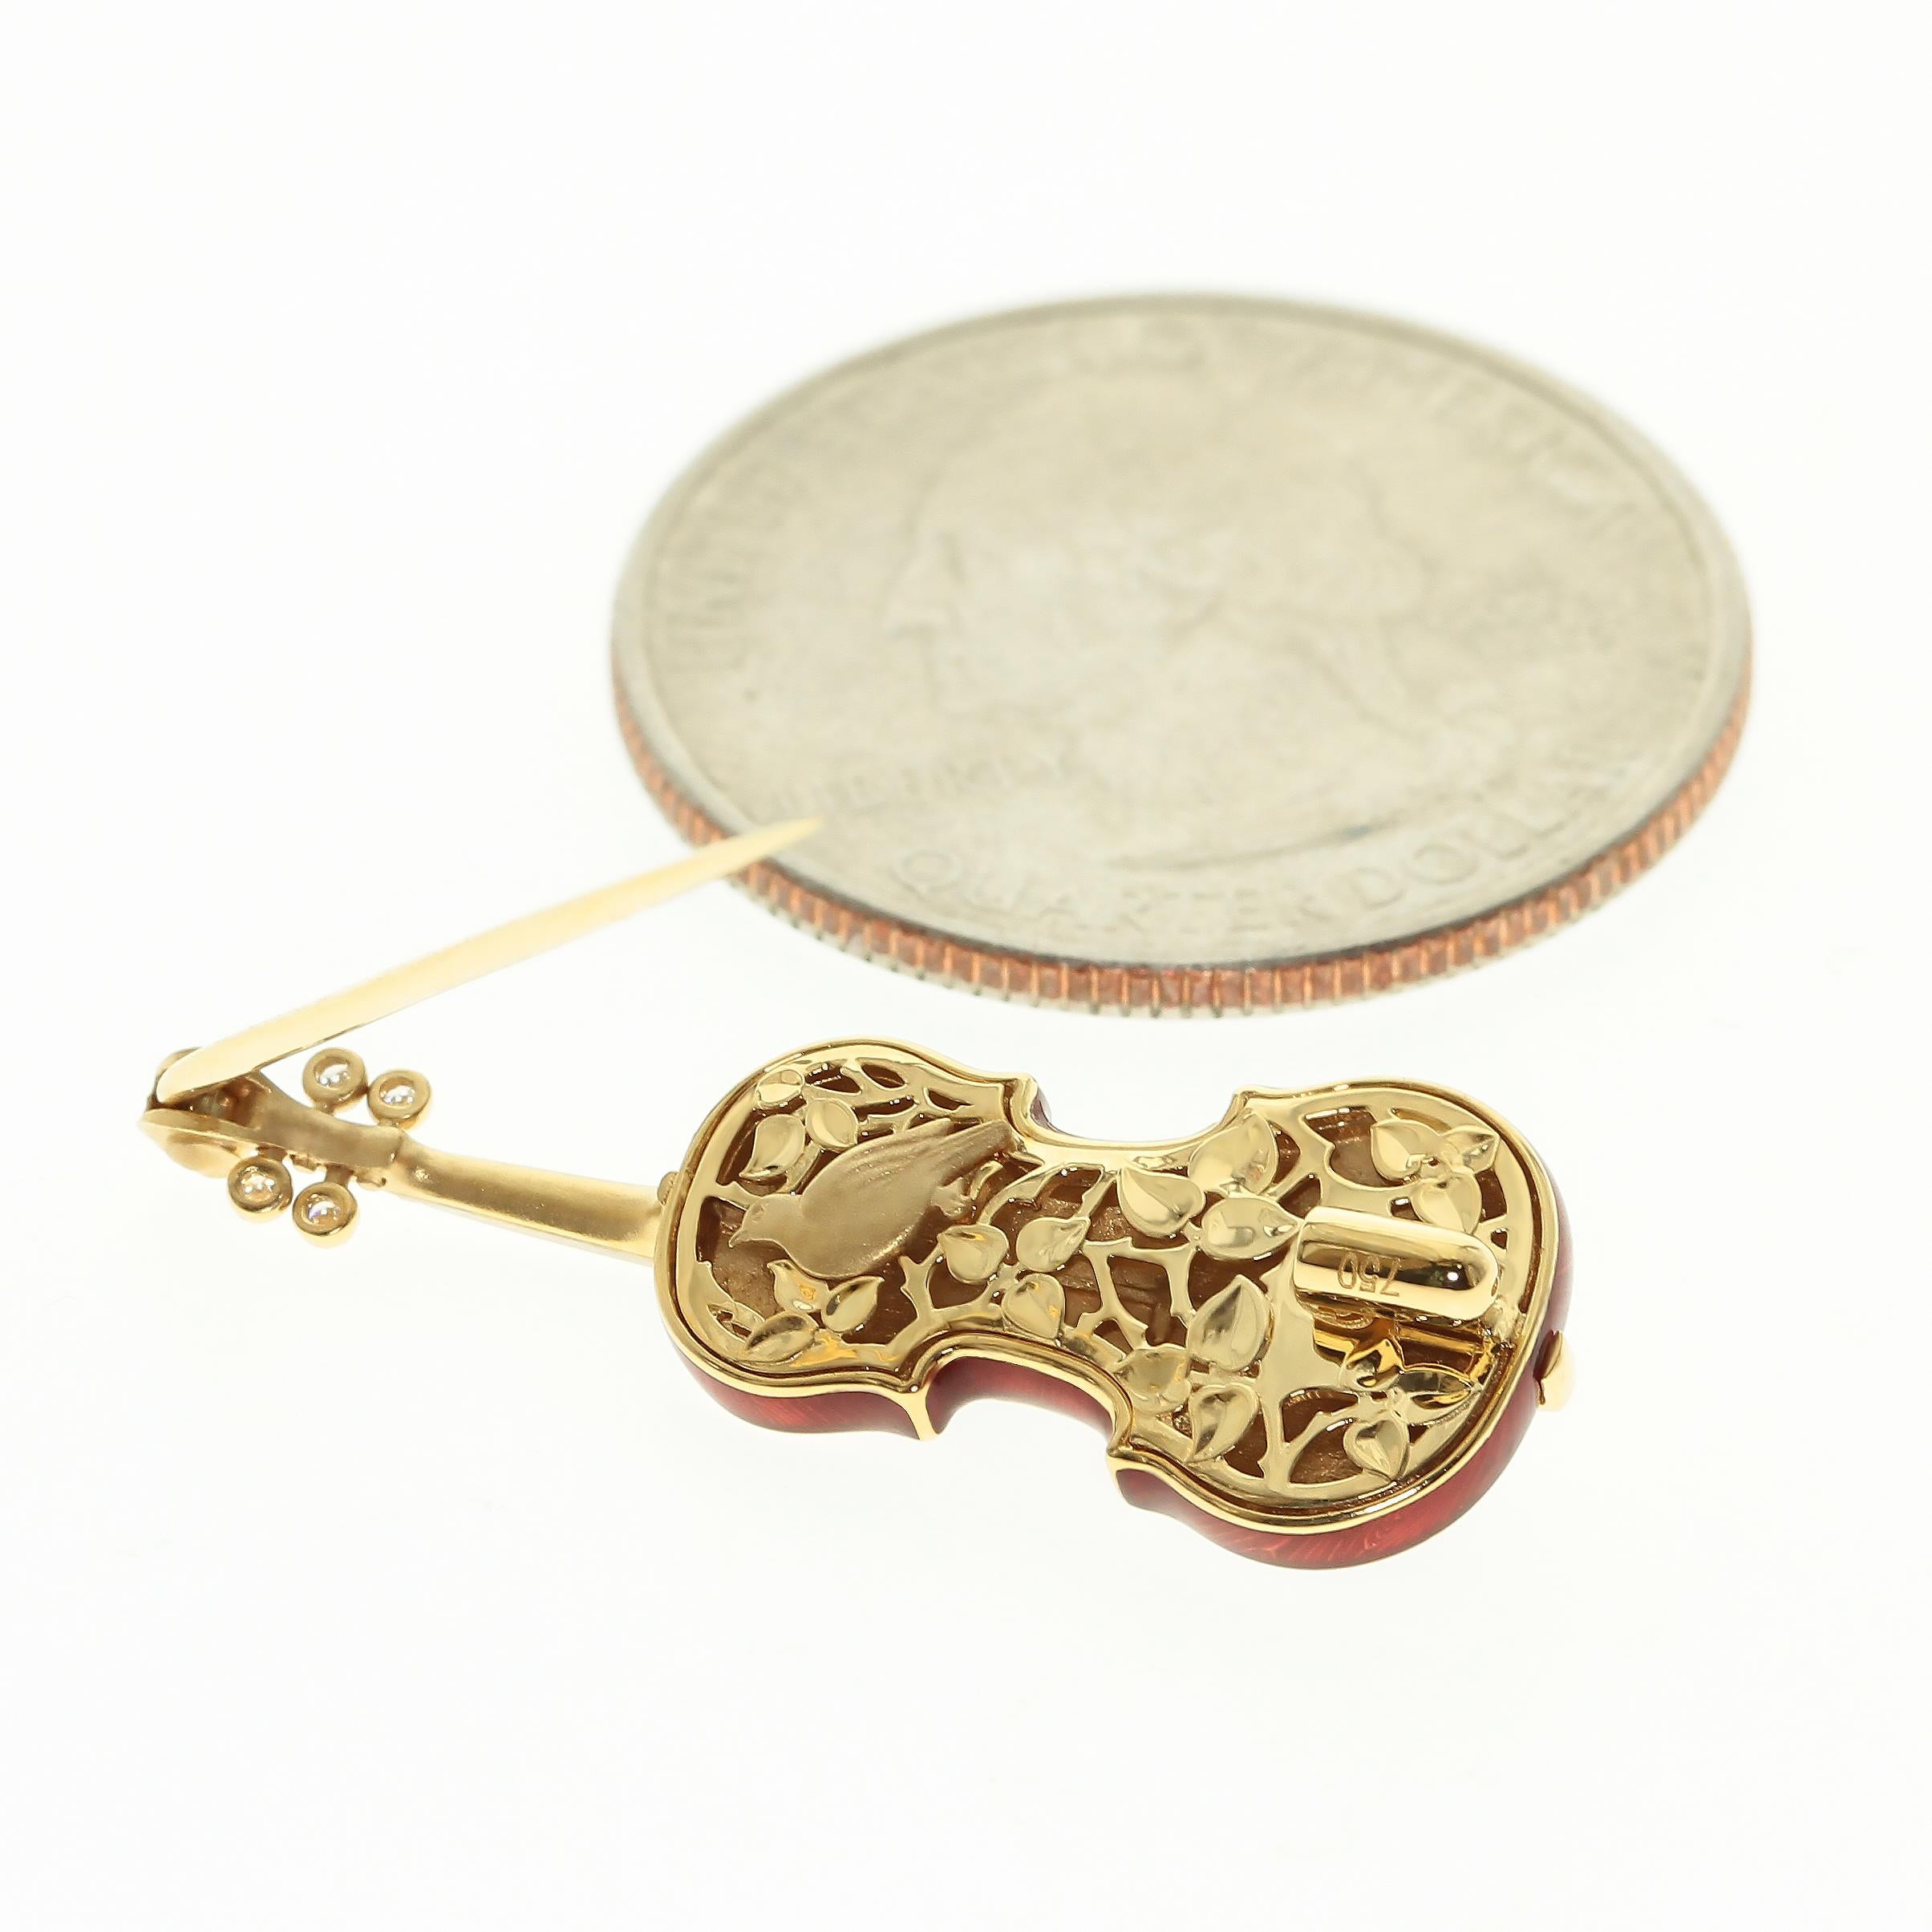 Classical Enamel Diamond 18 Karat Yellow Gold Mini Violin Brooch
Mousson Atelier represent with proud! Same size as a Quarter!
18 Karat Gold Enamel Violin Brooch. Our signature item form Musical Collection. Body with Enamel and Diamonds. Texture of